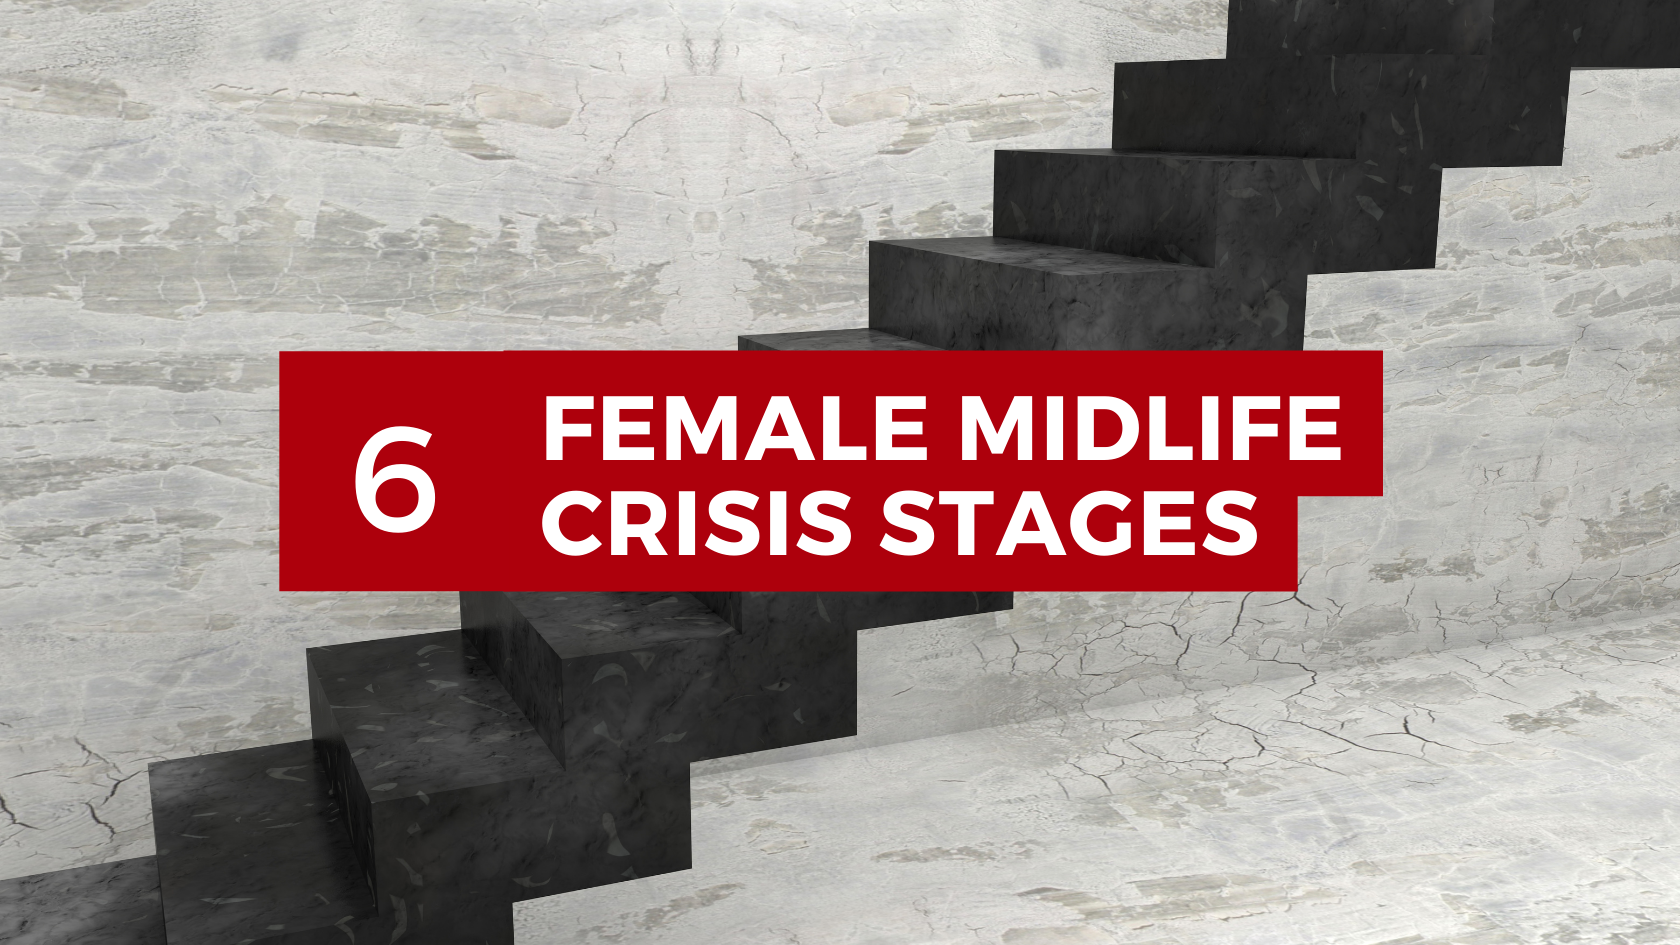 Female midlife crisis stages